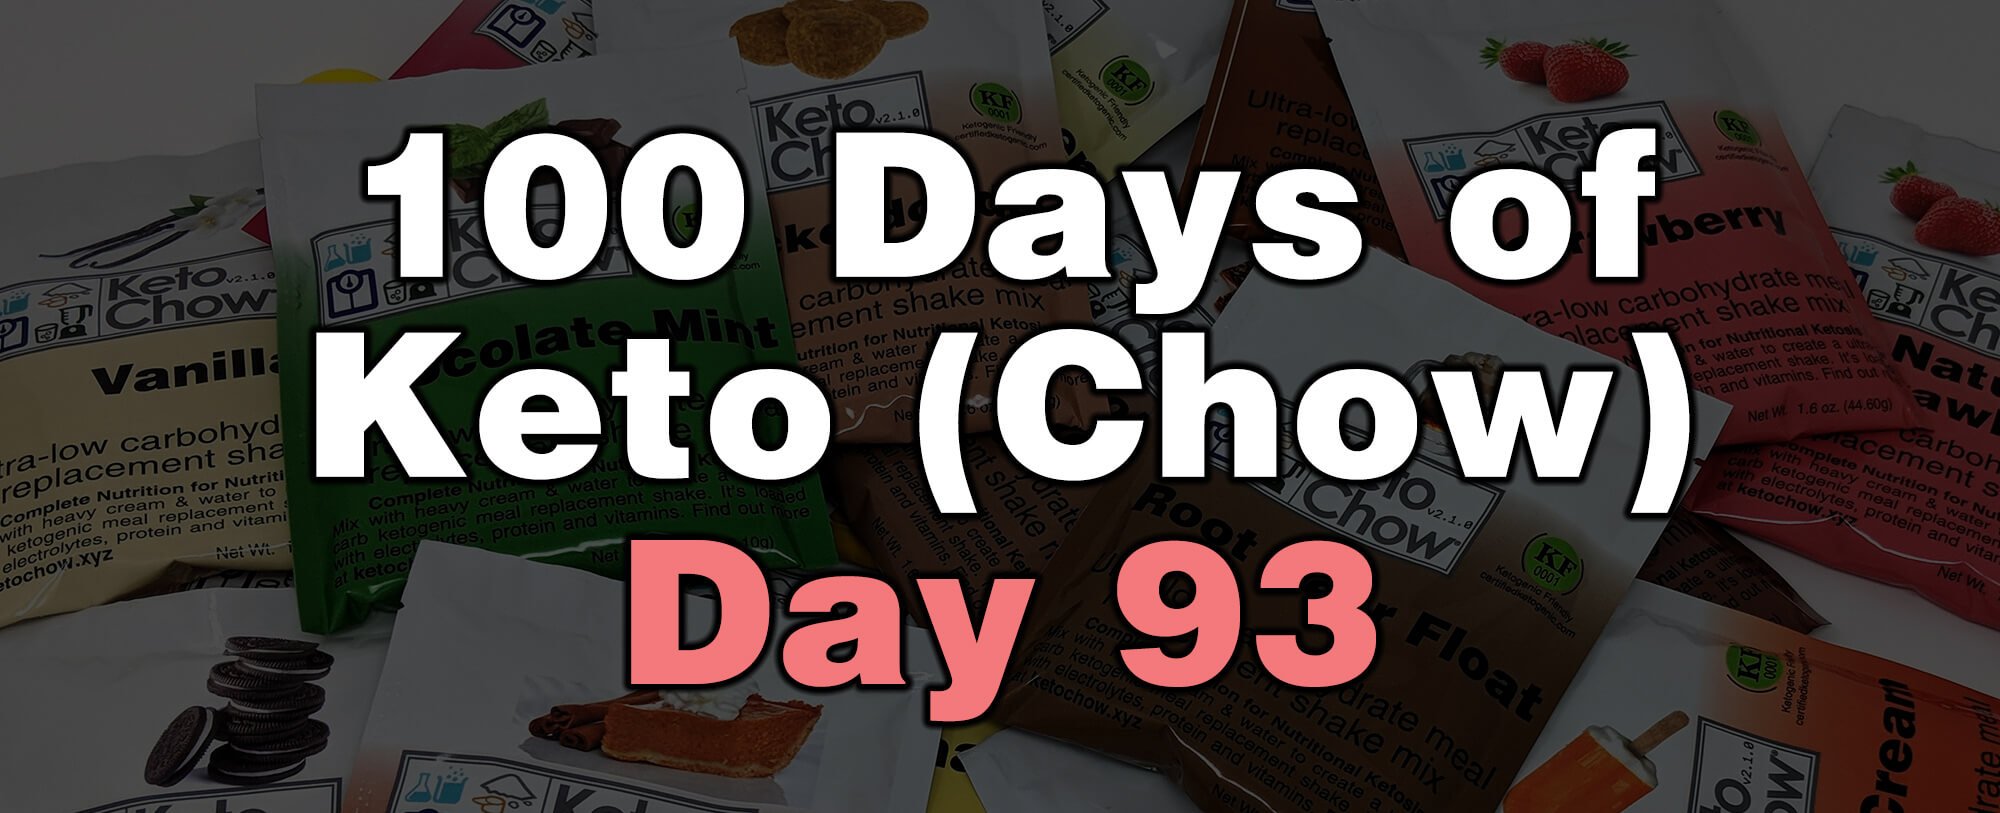 100 days of keto chow day 93